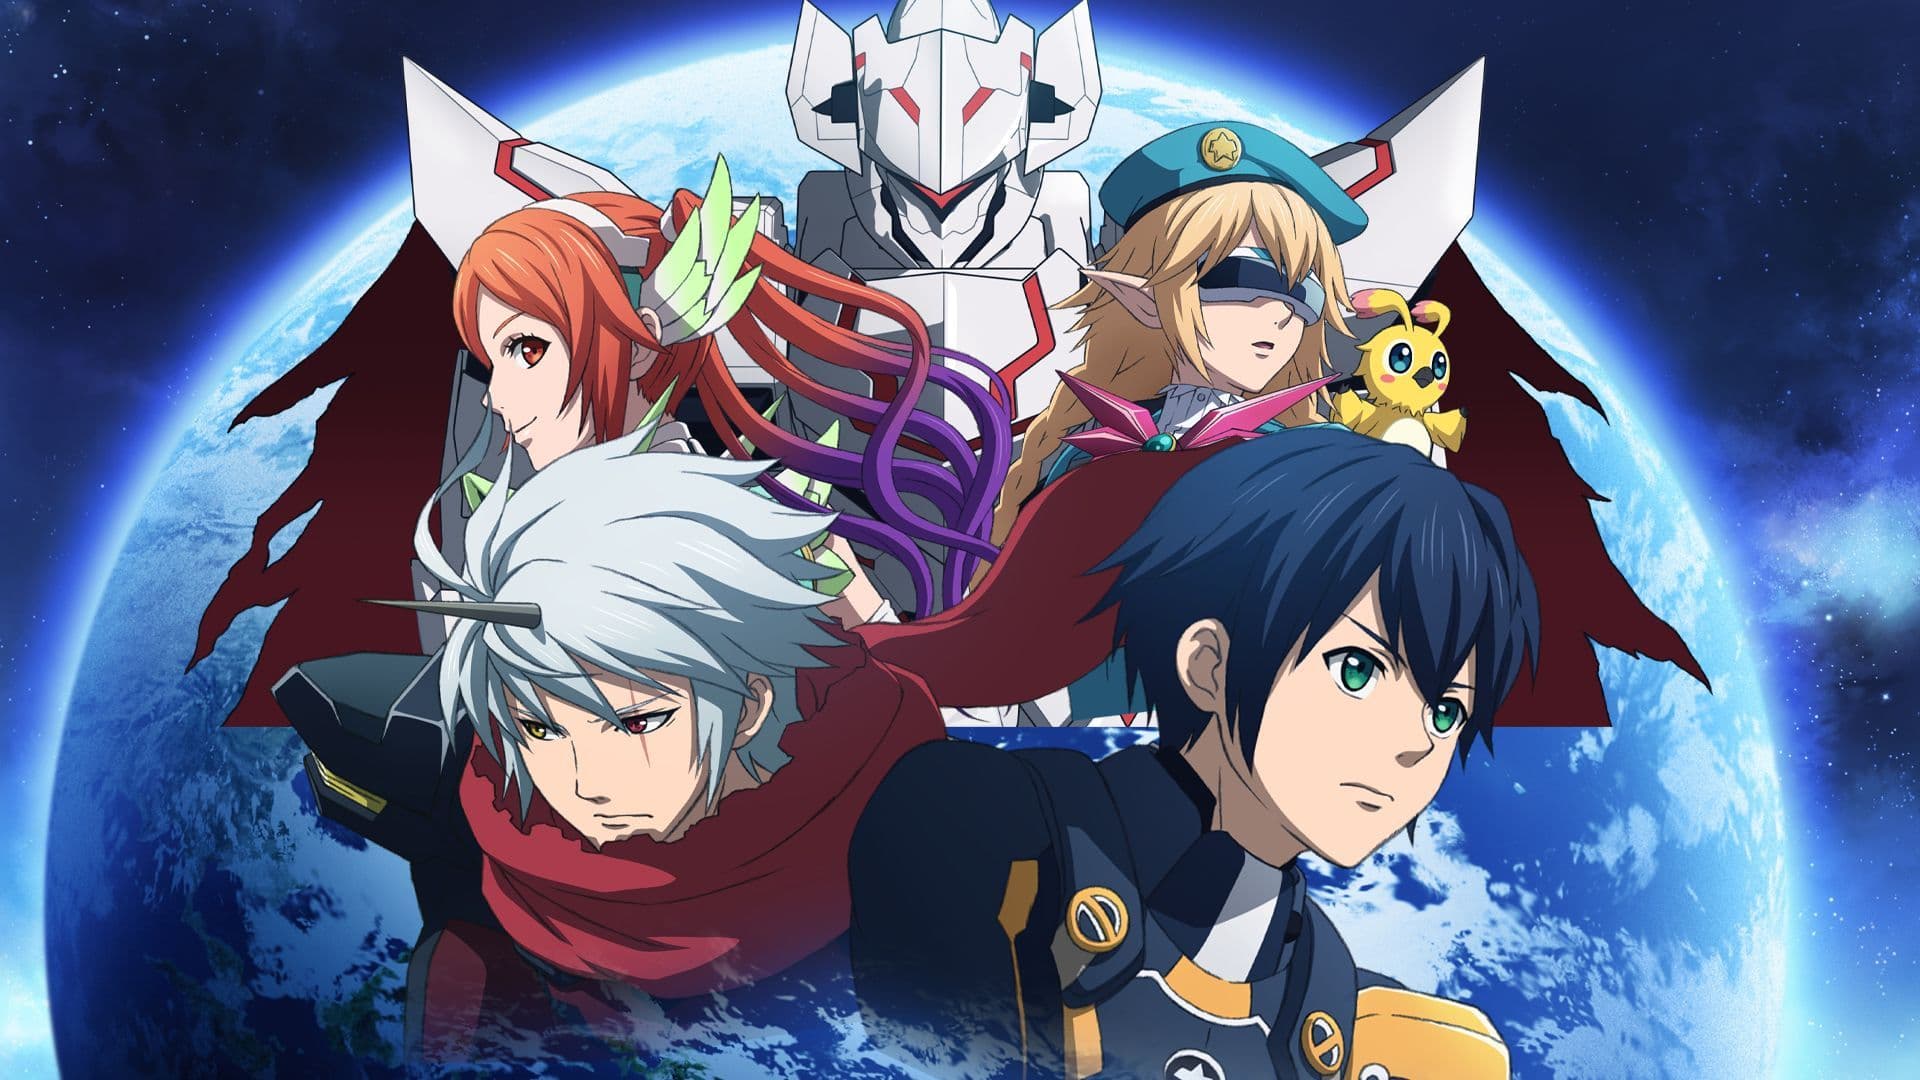 Phantasy Star Online 2 The Animation: Complete Collection Blu-ray